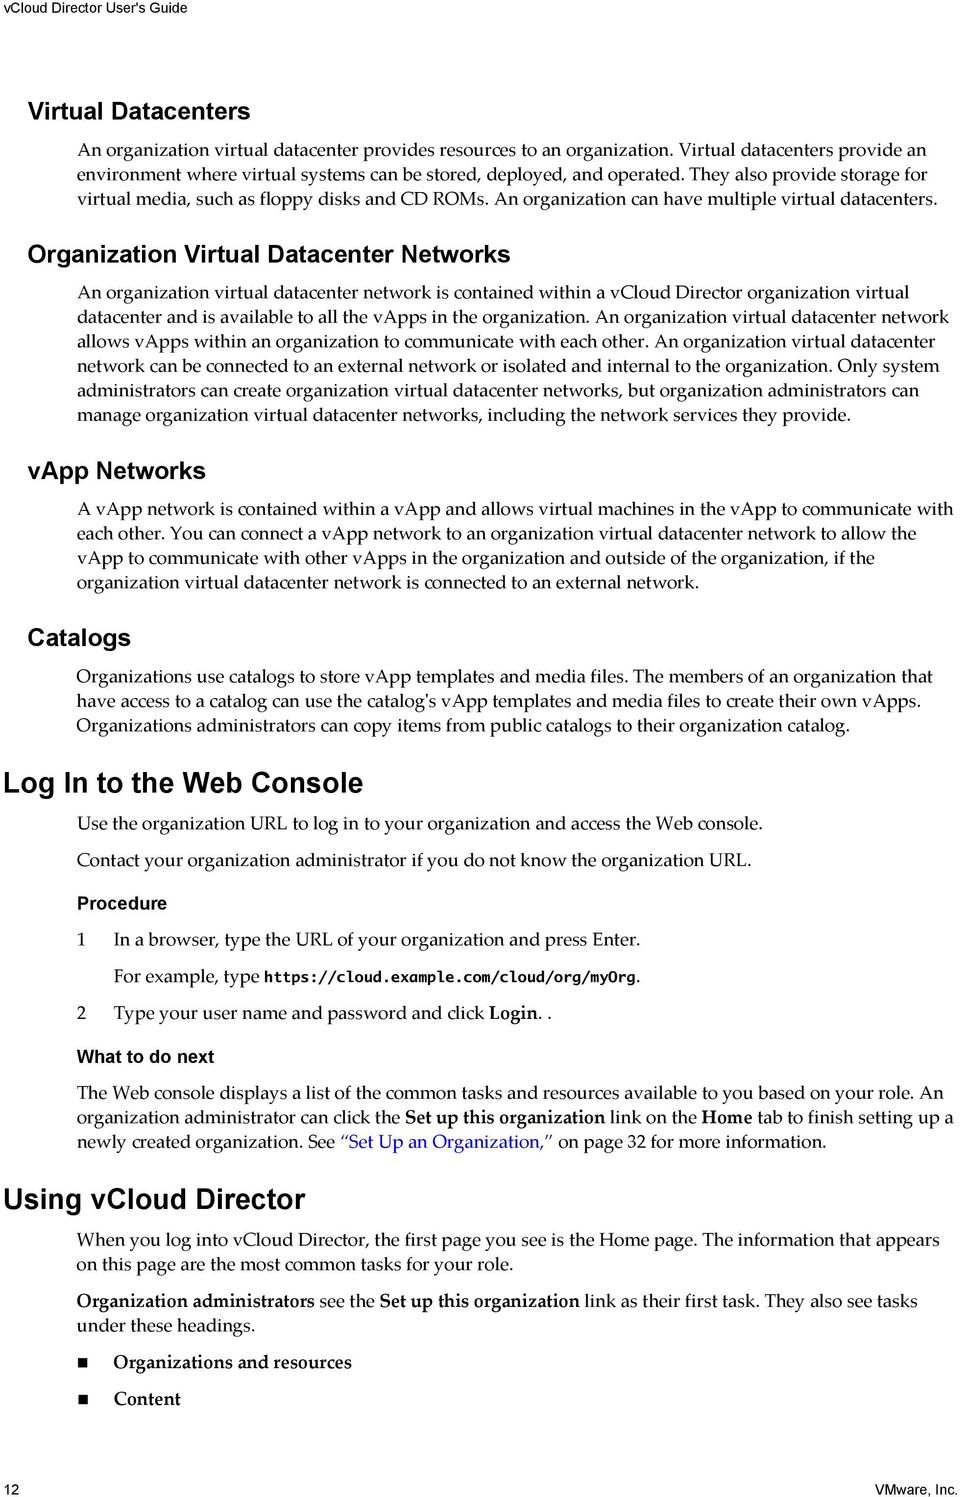 Organization Virtual Datacenter Networks An organization virtual datacenter network is contained within a vcloud Director organization virtual datacenter and is available to all the vapps in the